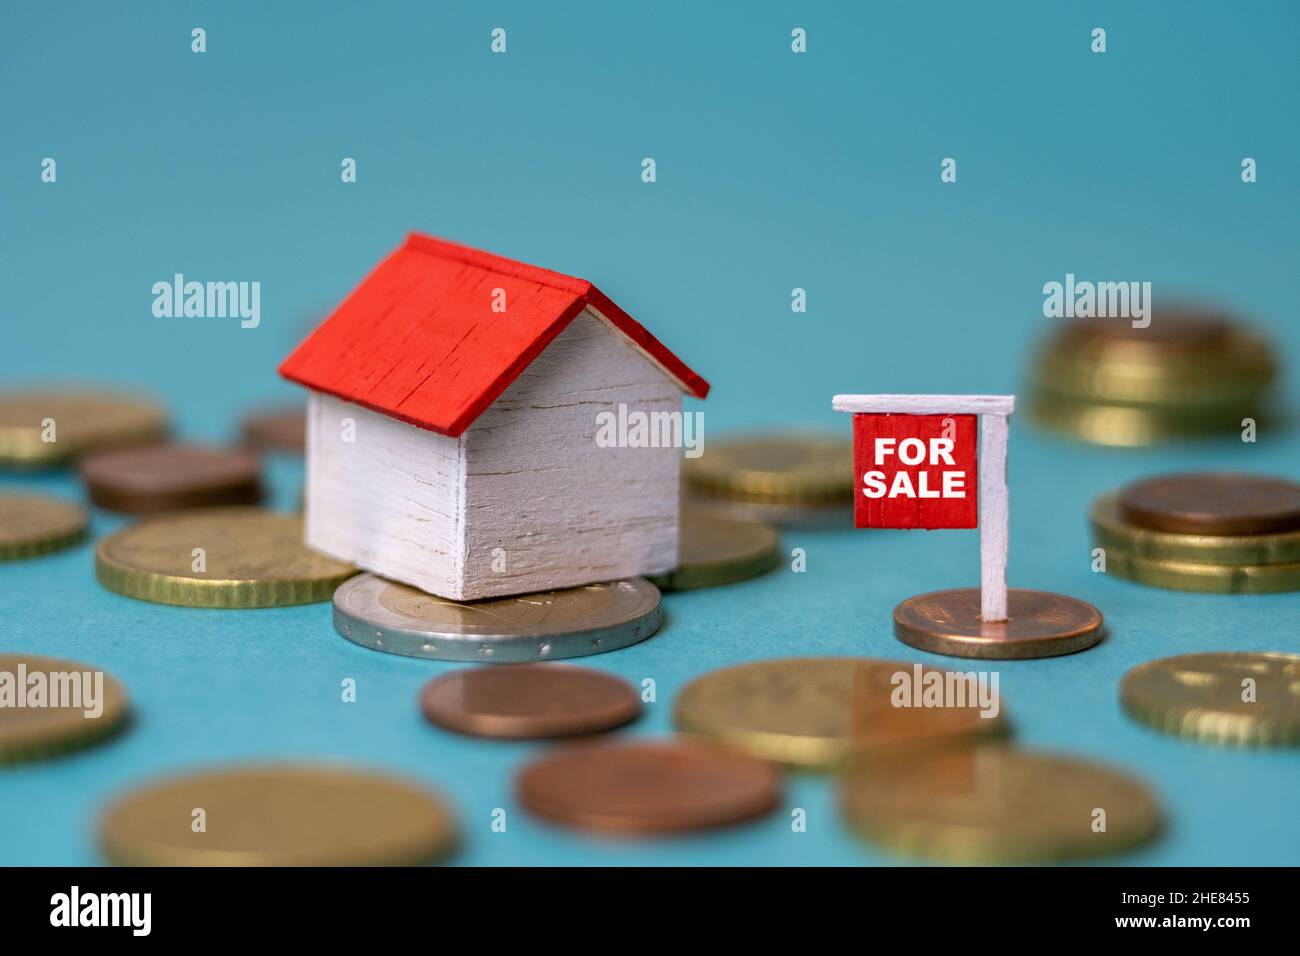 Tiny house on money and a for sale sign - Housing market, real estate, property investment, saving money, habitation cost concept Stock Photo